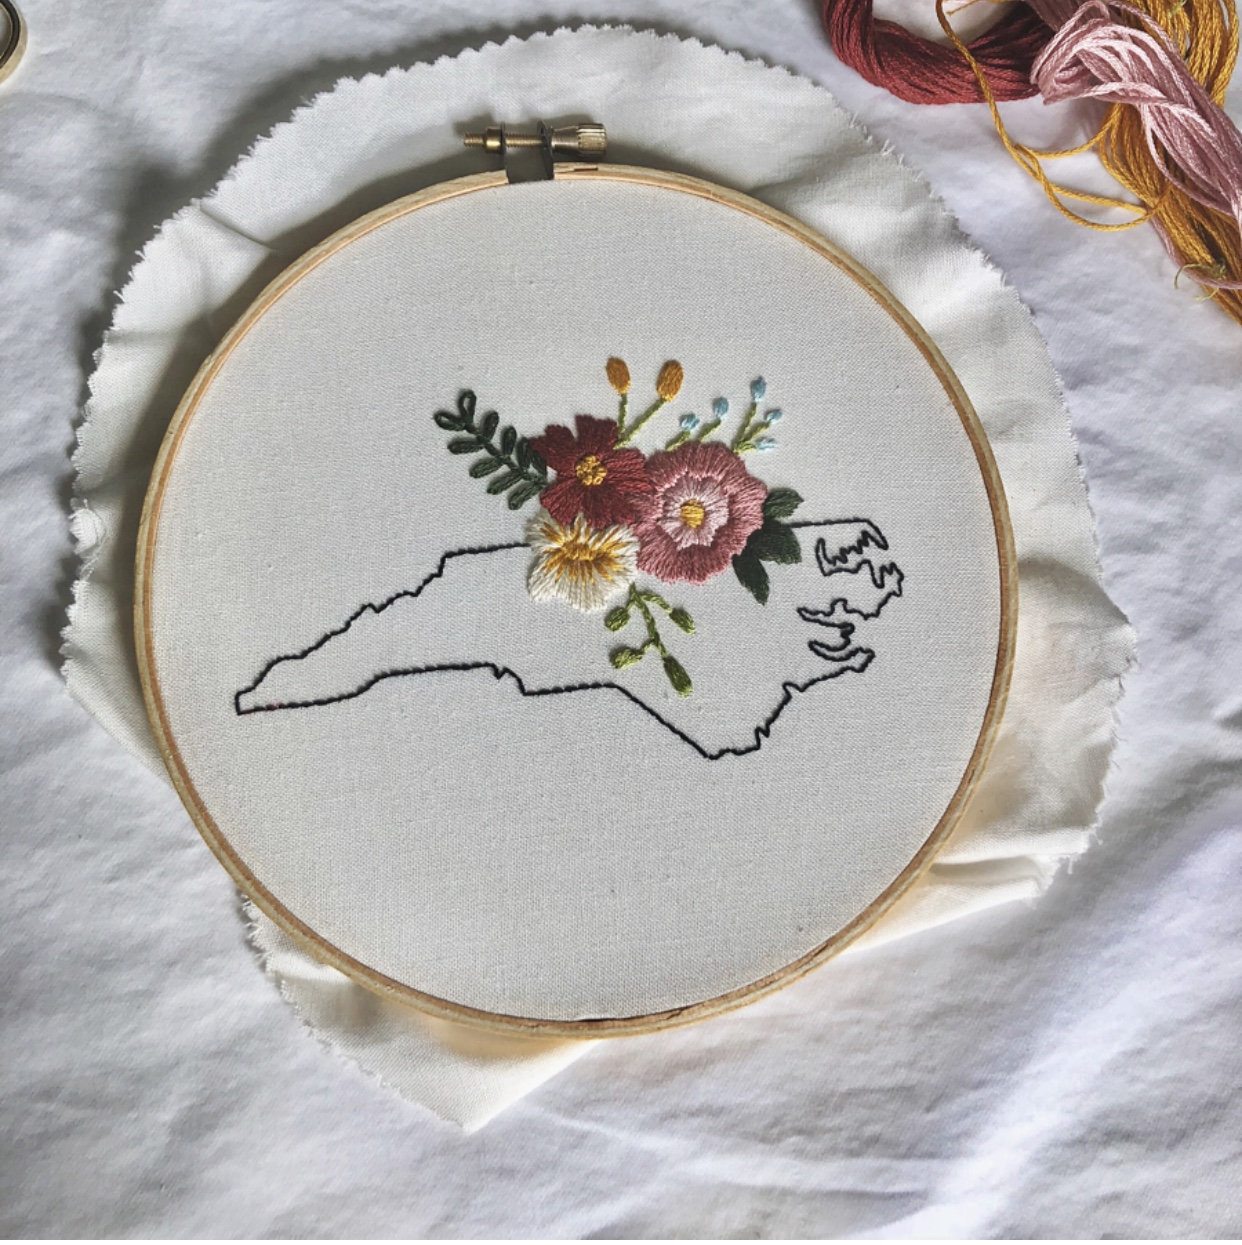 How To Make An Embroidery Pattern Kit Any Floral State Hand Embroidery Pattern And Materials